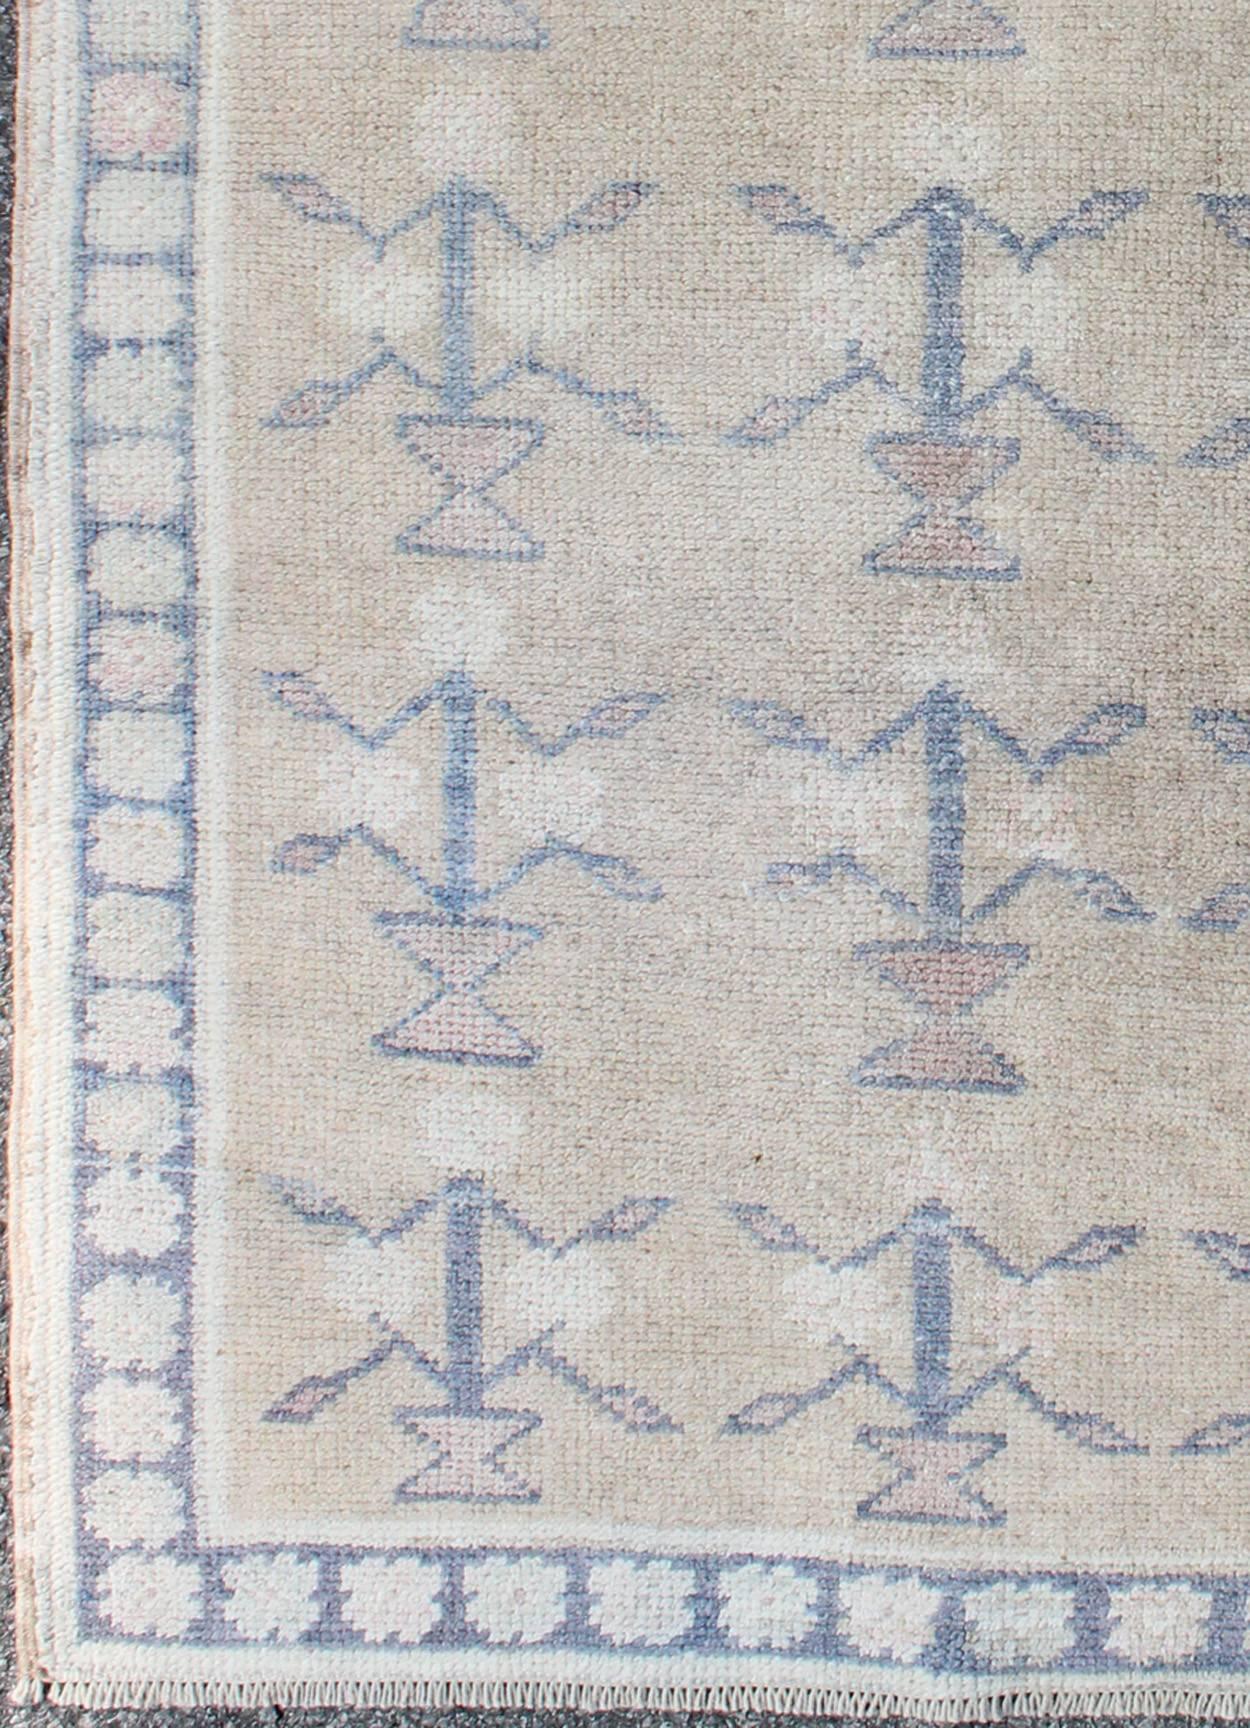 This Tulu carpet features several blue tribal motifs laid across a sand-colored field and enclosed within a blue border of alternating botanical motifs. Accent colors include ivory, taupe, and cream. Tulus are woven in the Konya area with a very